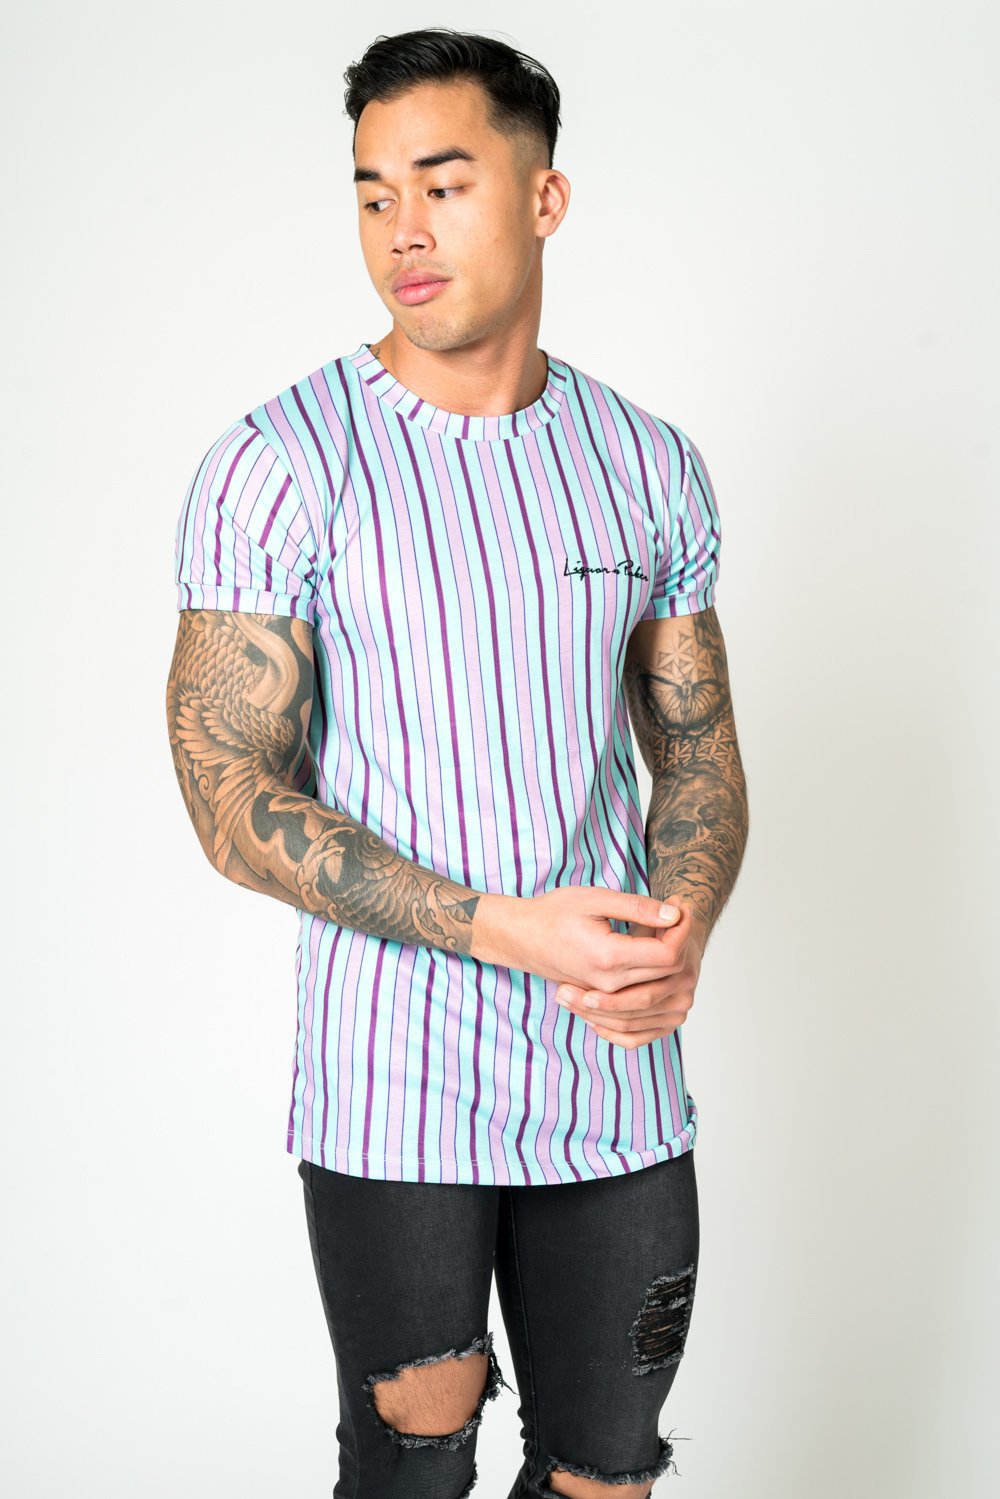 MUSCLE FIT T - SHIRT IN CANDY STRIPE LILAC AND LIME - Liquor N Poker LIQUOR N POKER